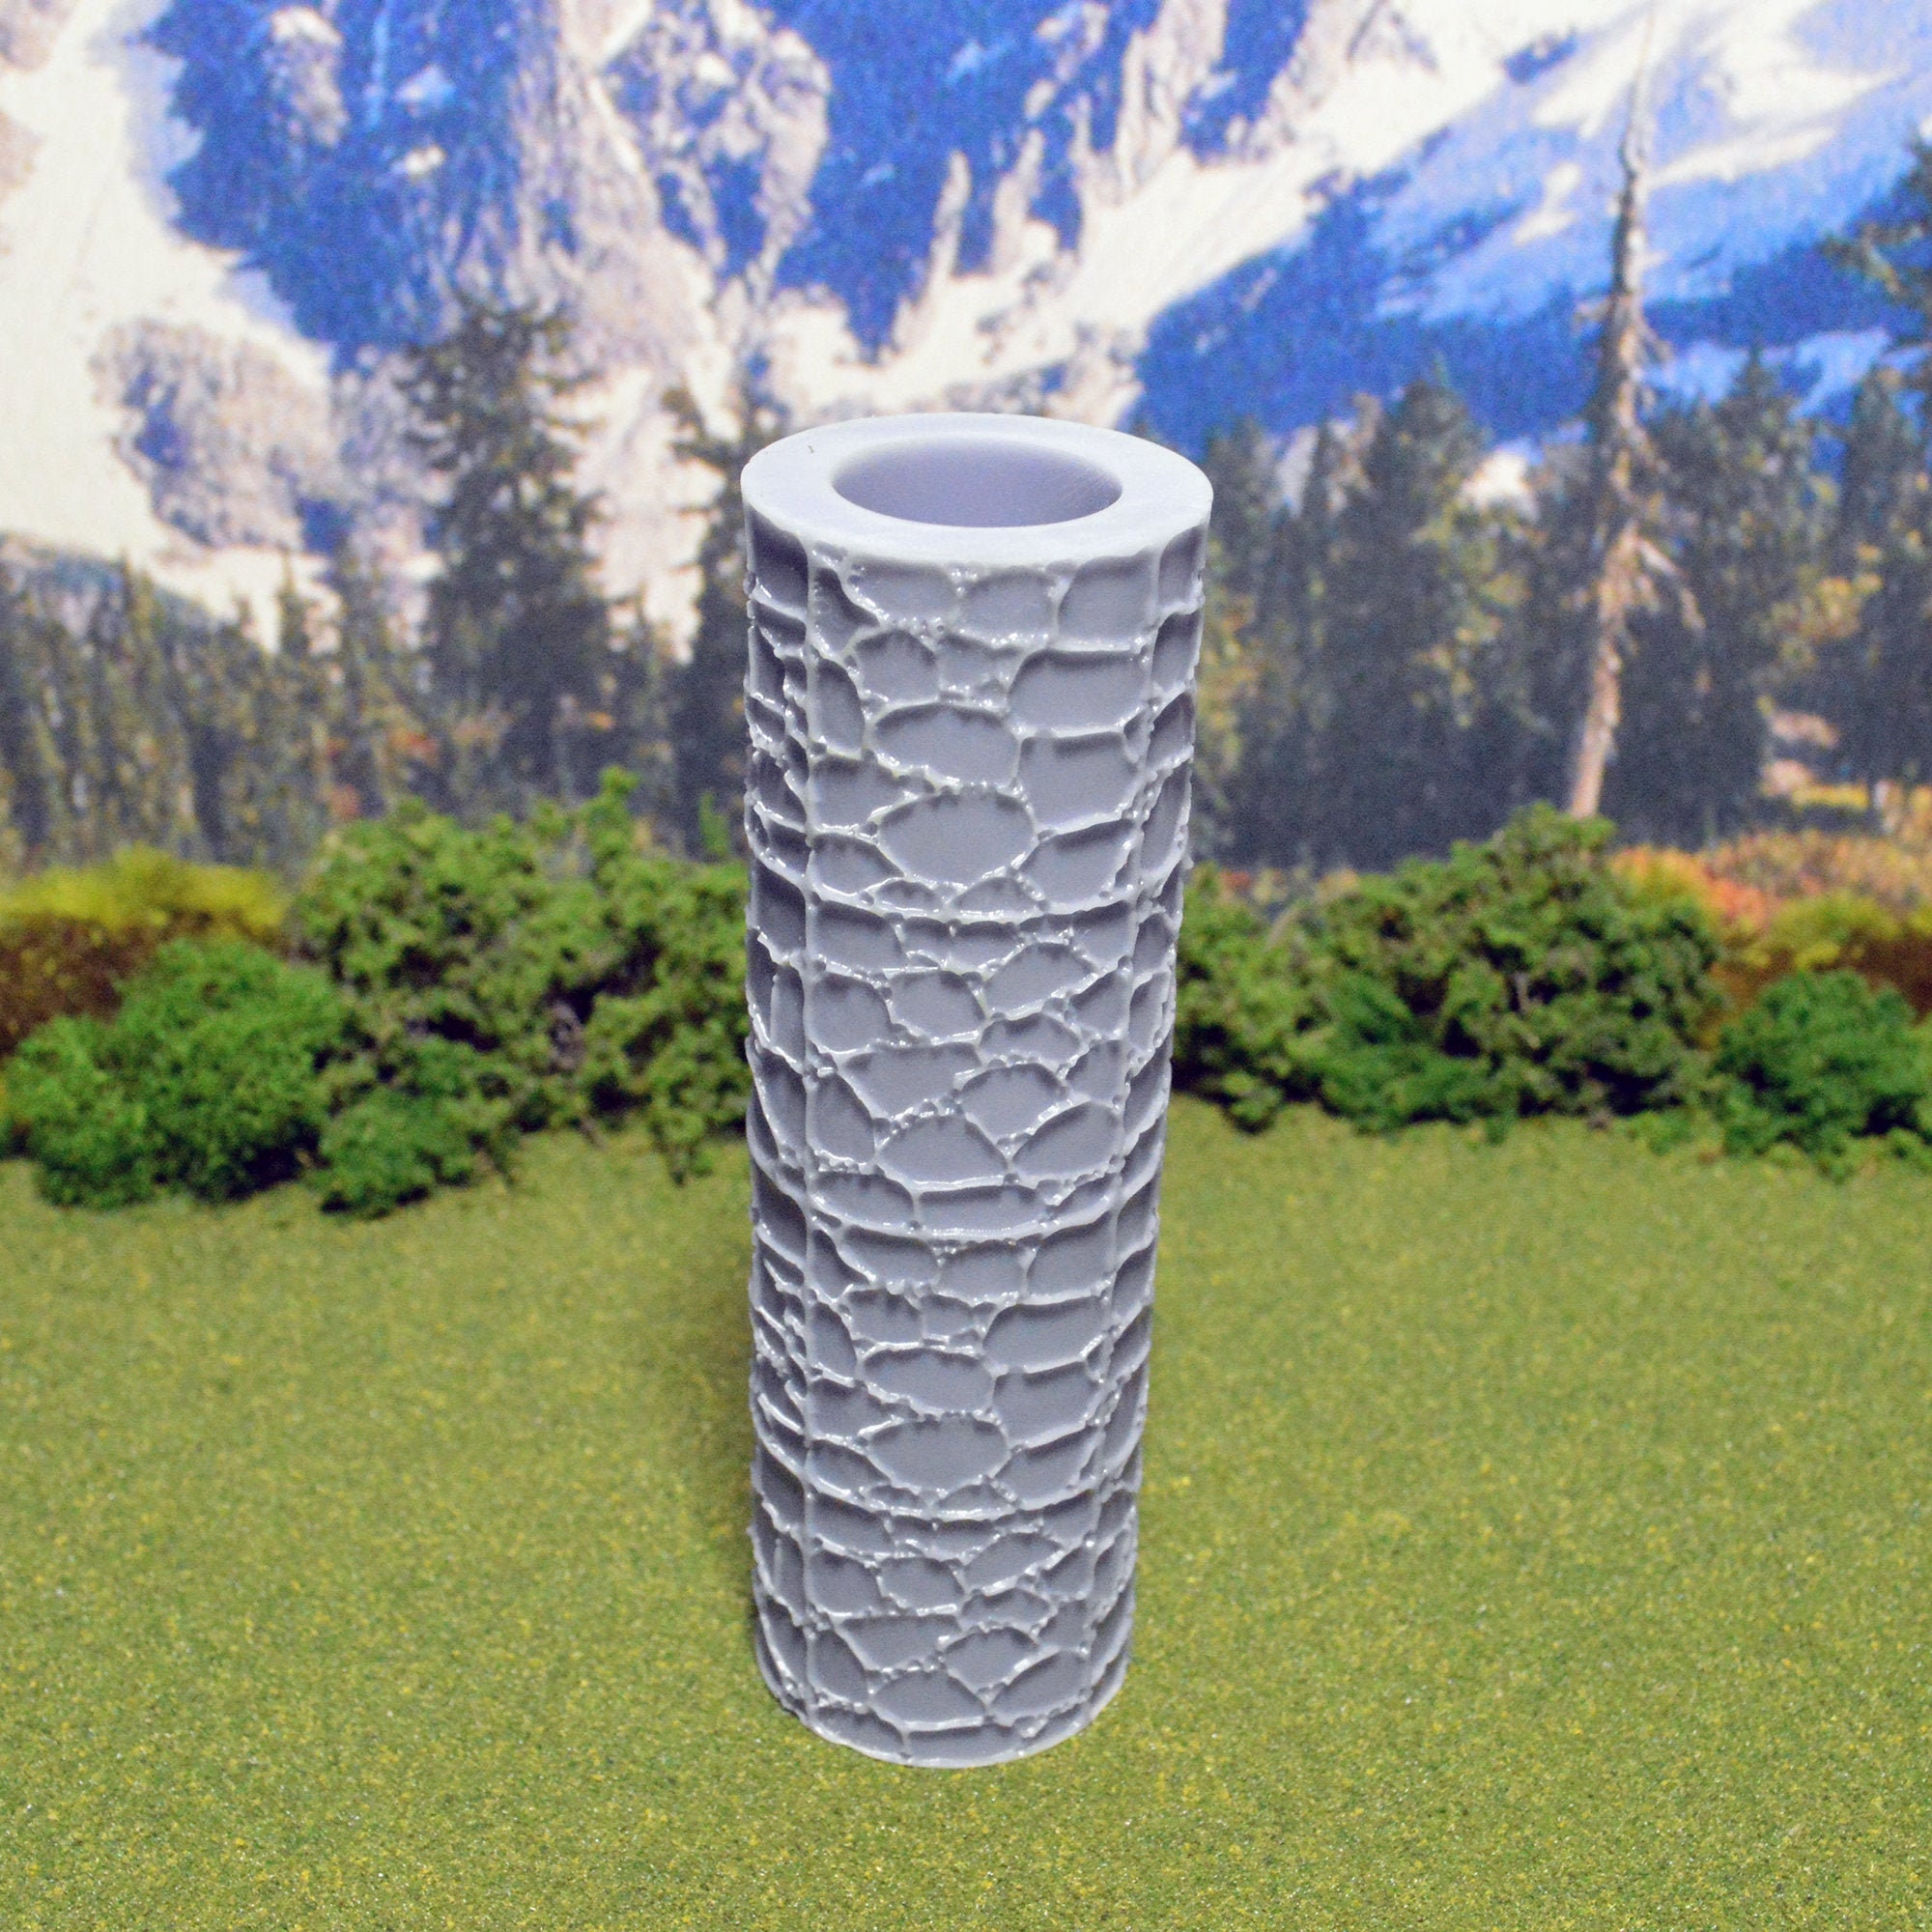 Natural Stone Wall Pattern Texture Roller High Quality Texture for Modeling  Clay 9-2 